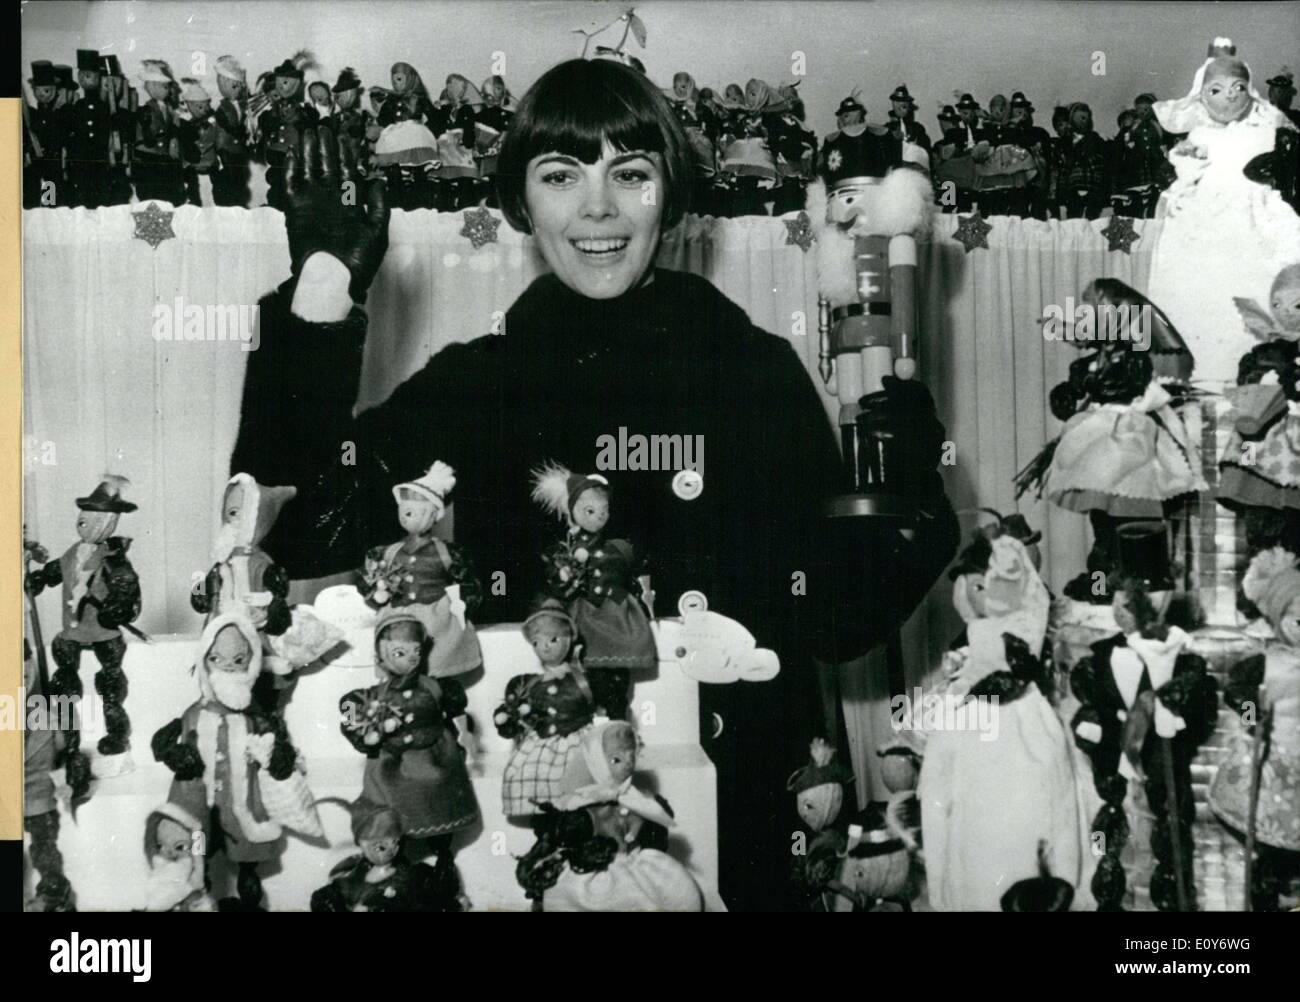 Dec. 14, 1968 - Beautiful French singer Mireille Mathieu is seen here in Munich enjoying the ''Zwetschgenmanderl'' dolls. She bought several to bring home to family. Stock Photo